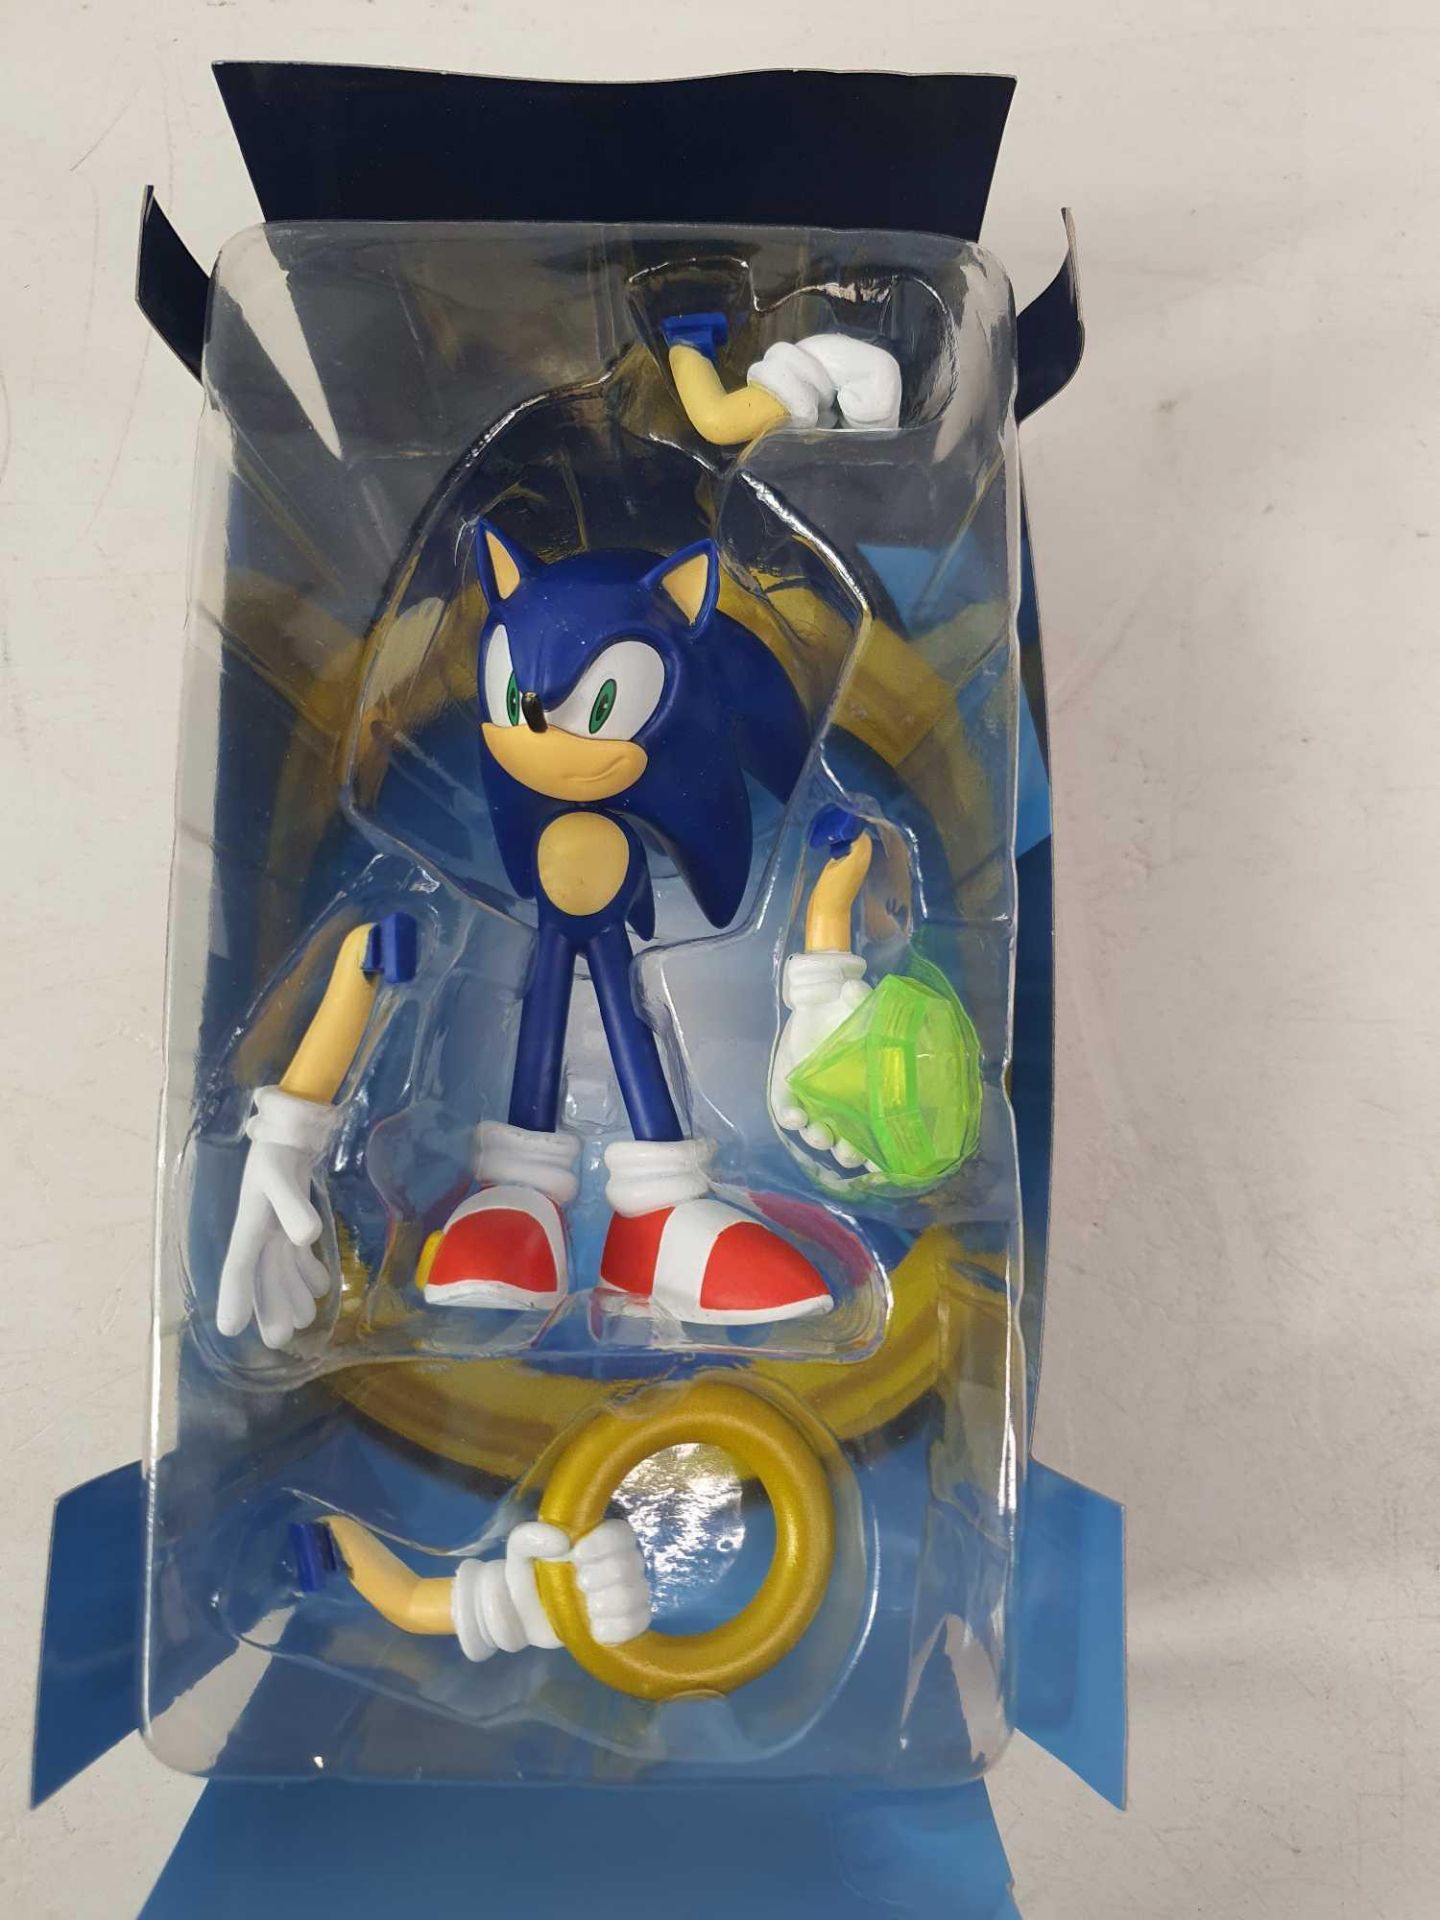 SONIC THE HEDGEHOG BUILDABLE FIGURE - Image 3 of 3